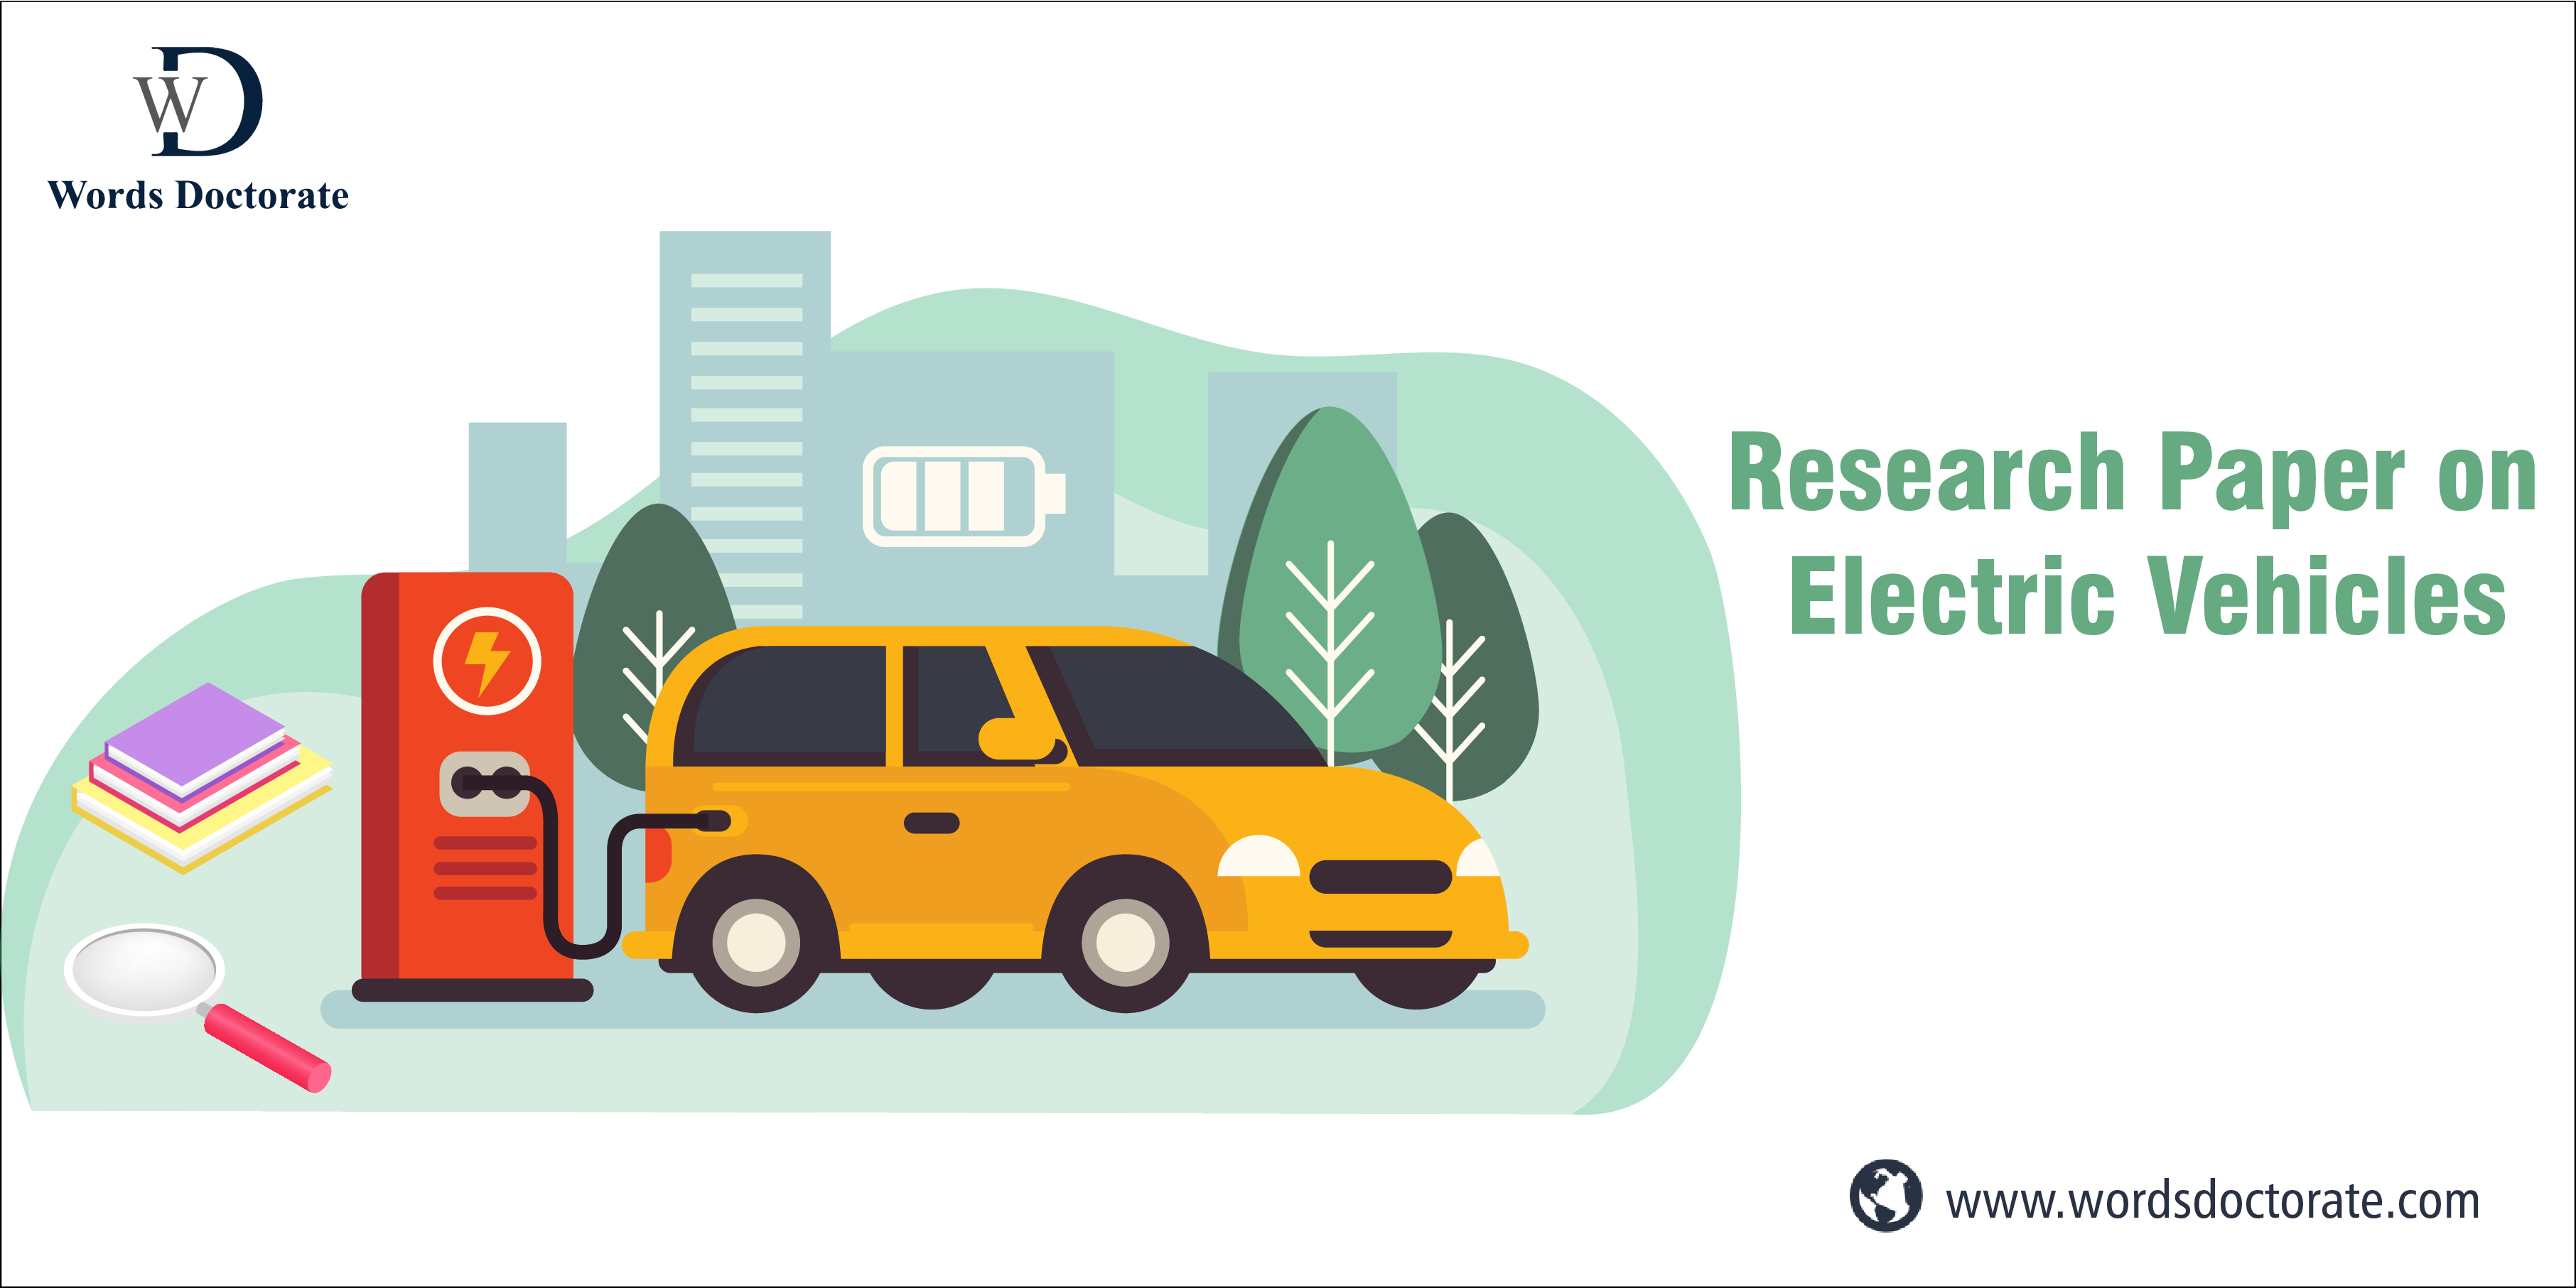 Research Paper on Electric Vehicles